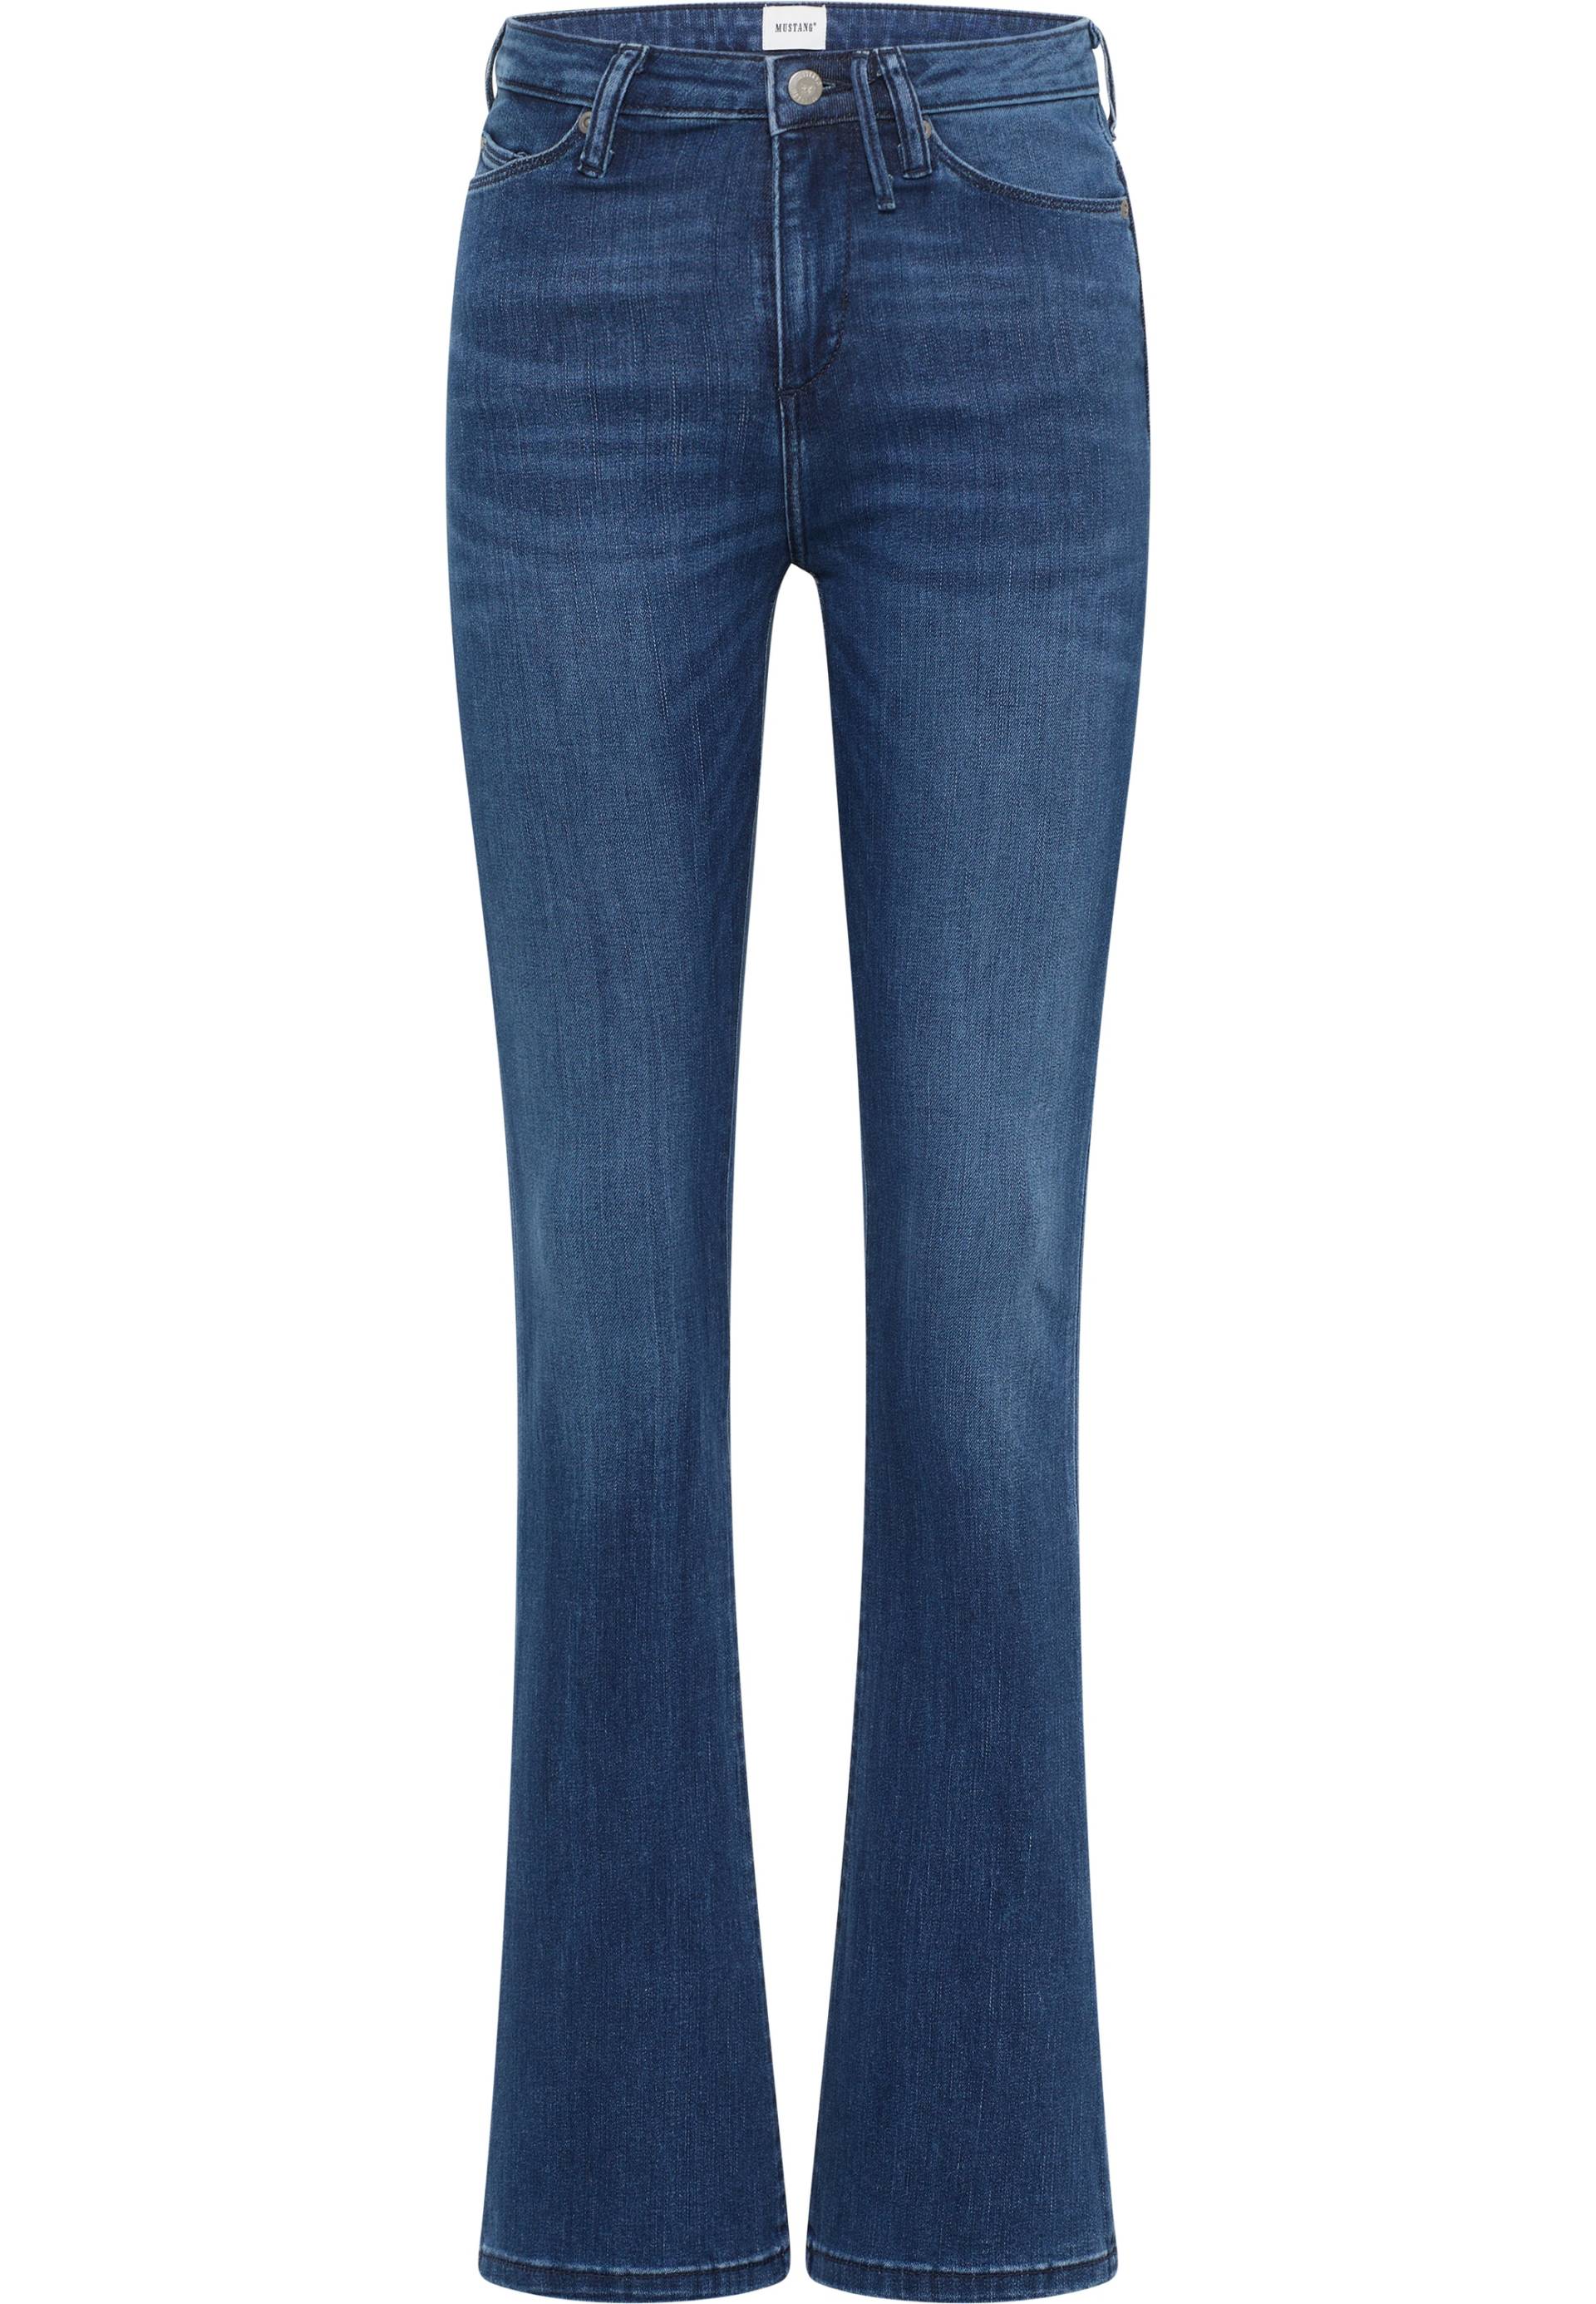 MUSTANG 5-Pocket-Jeans »Style June Flared« von mustang